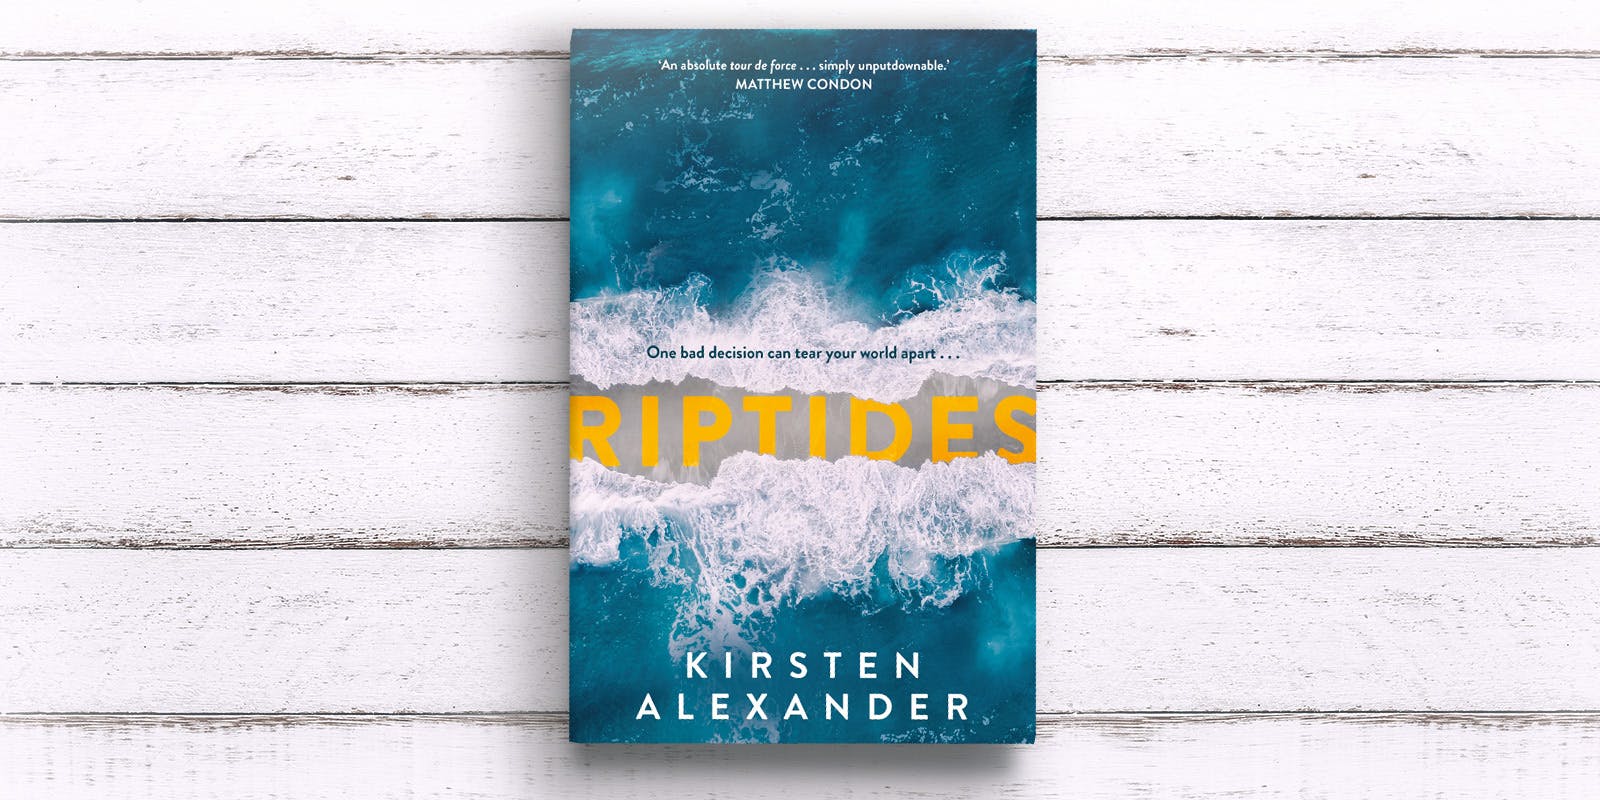 Swept up in a Riptide